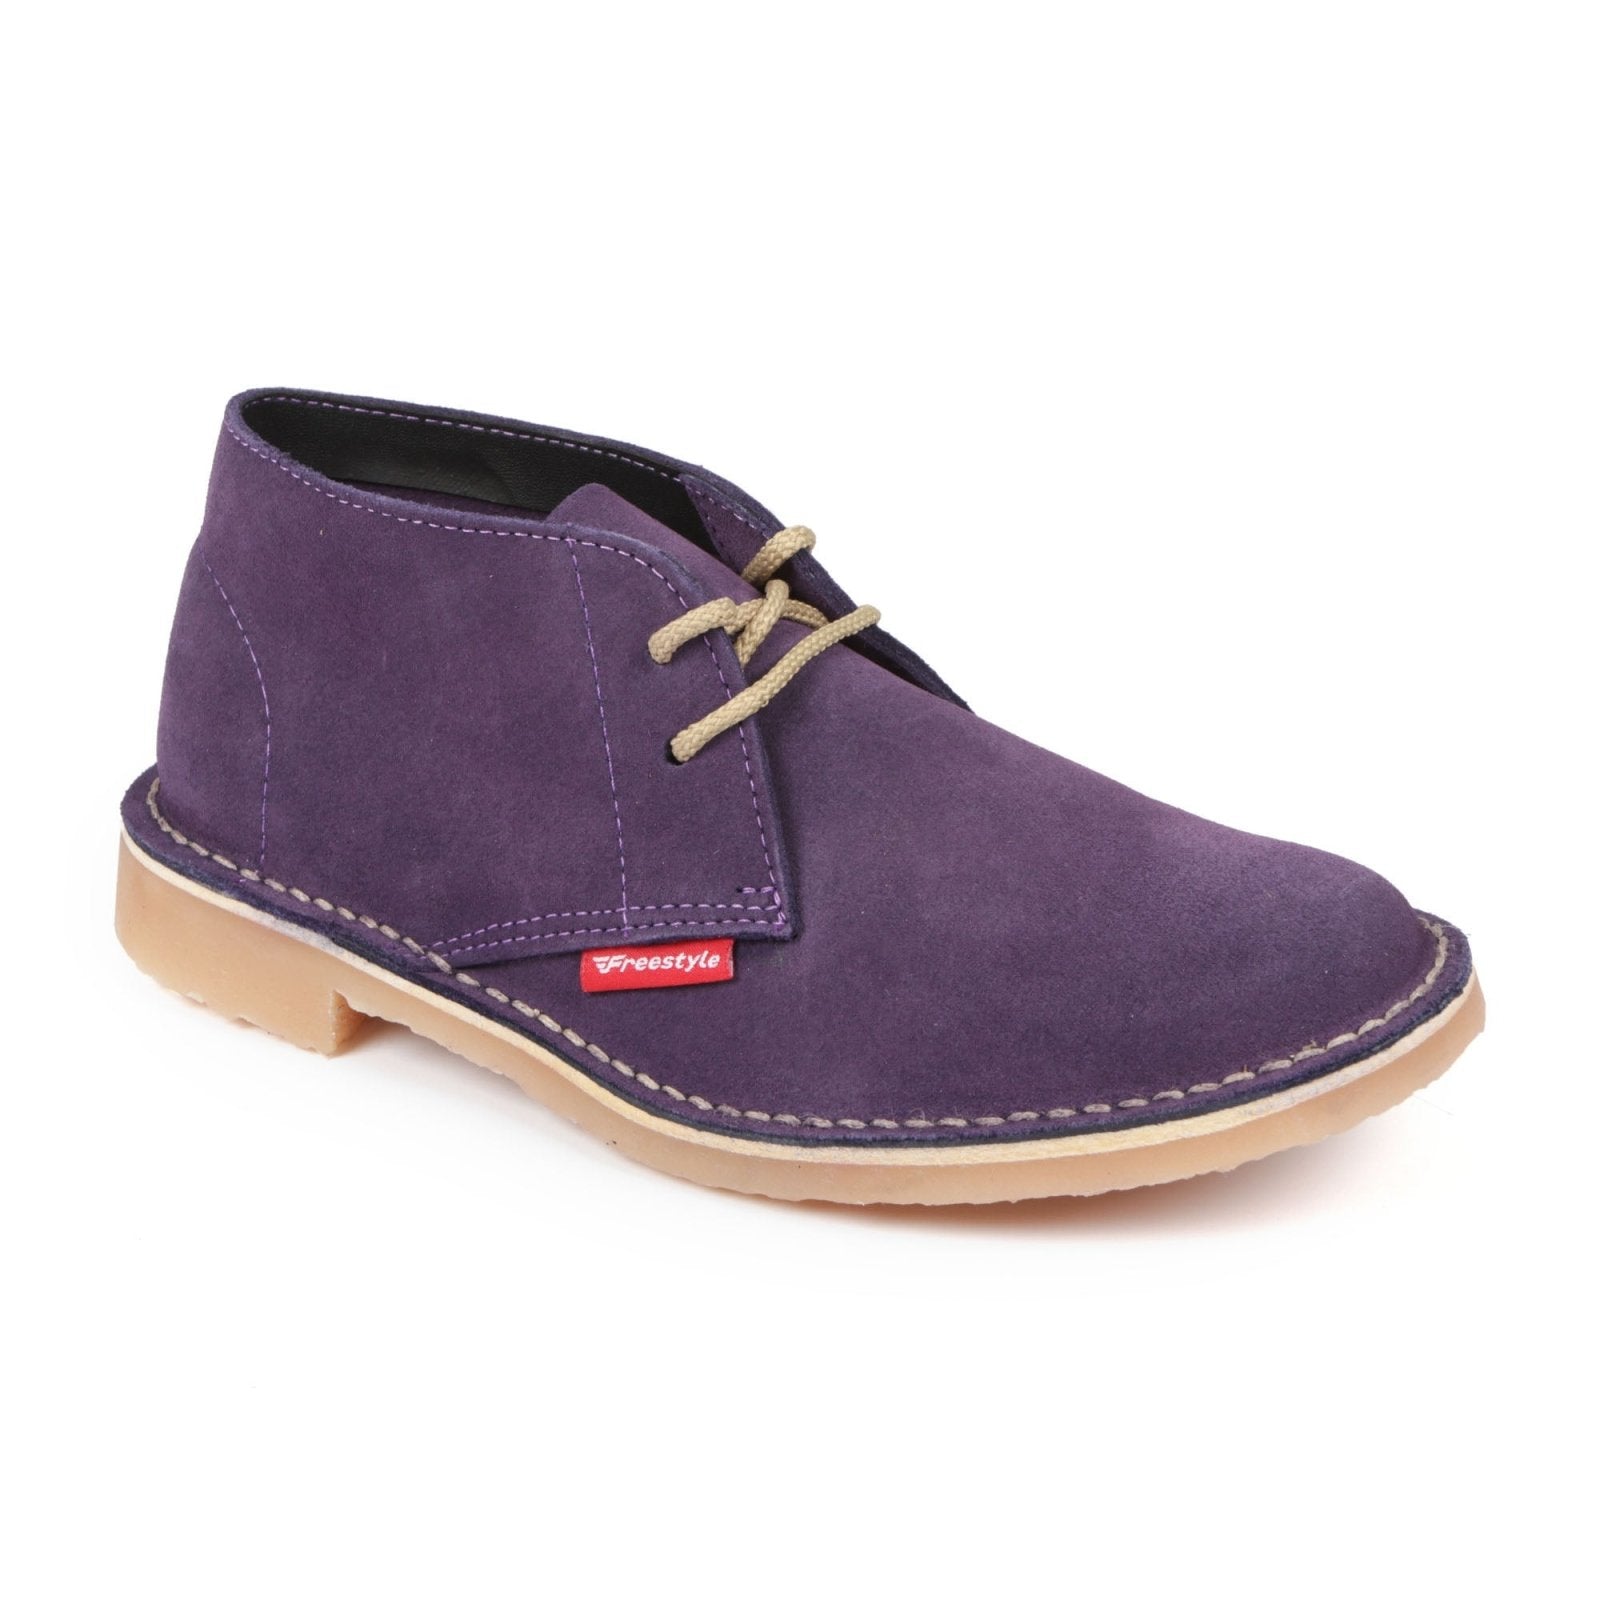 Hunter Vellie Unisex Premium Suede - Purple - Freestyle SA Proudly local vellies leather boots veldskoens vellies leather shoes suede veldskoens